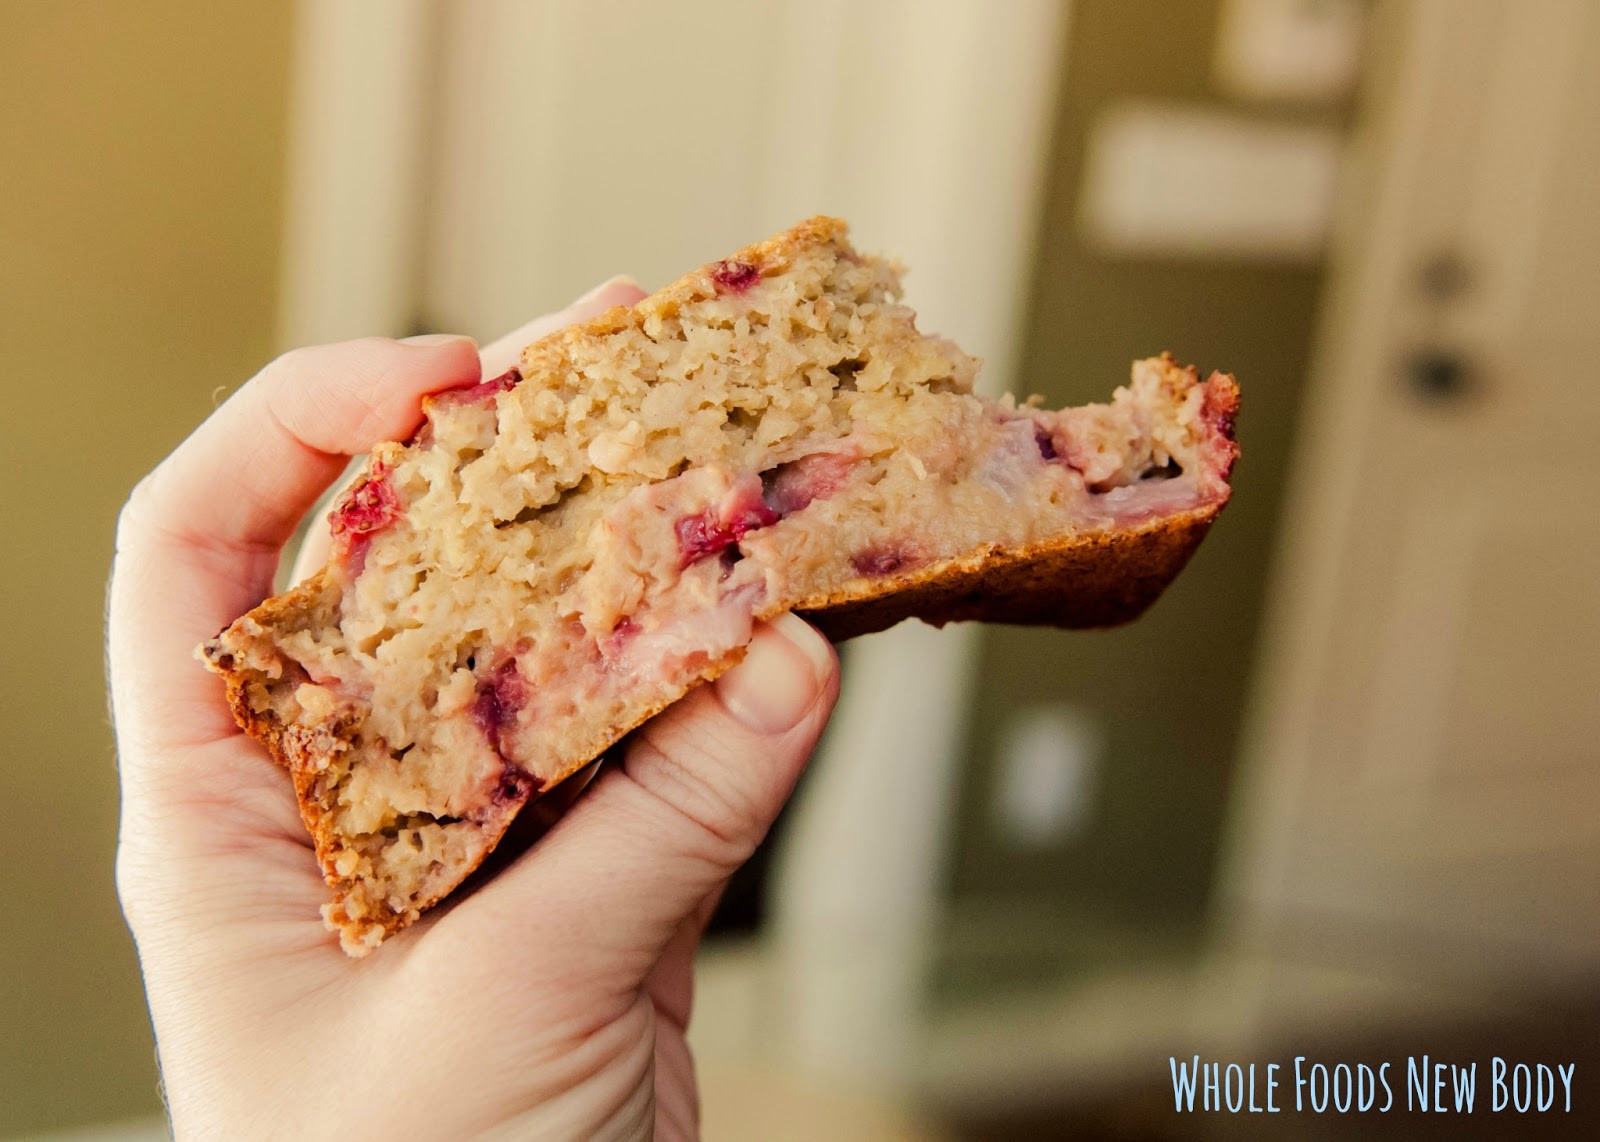 Clean Eating Banana Bread
 Whole Foods New Body Clean Eating Strawberry Banana Bread